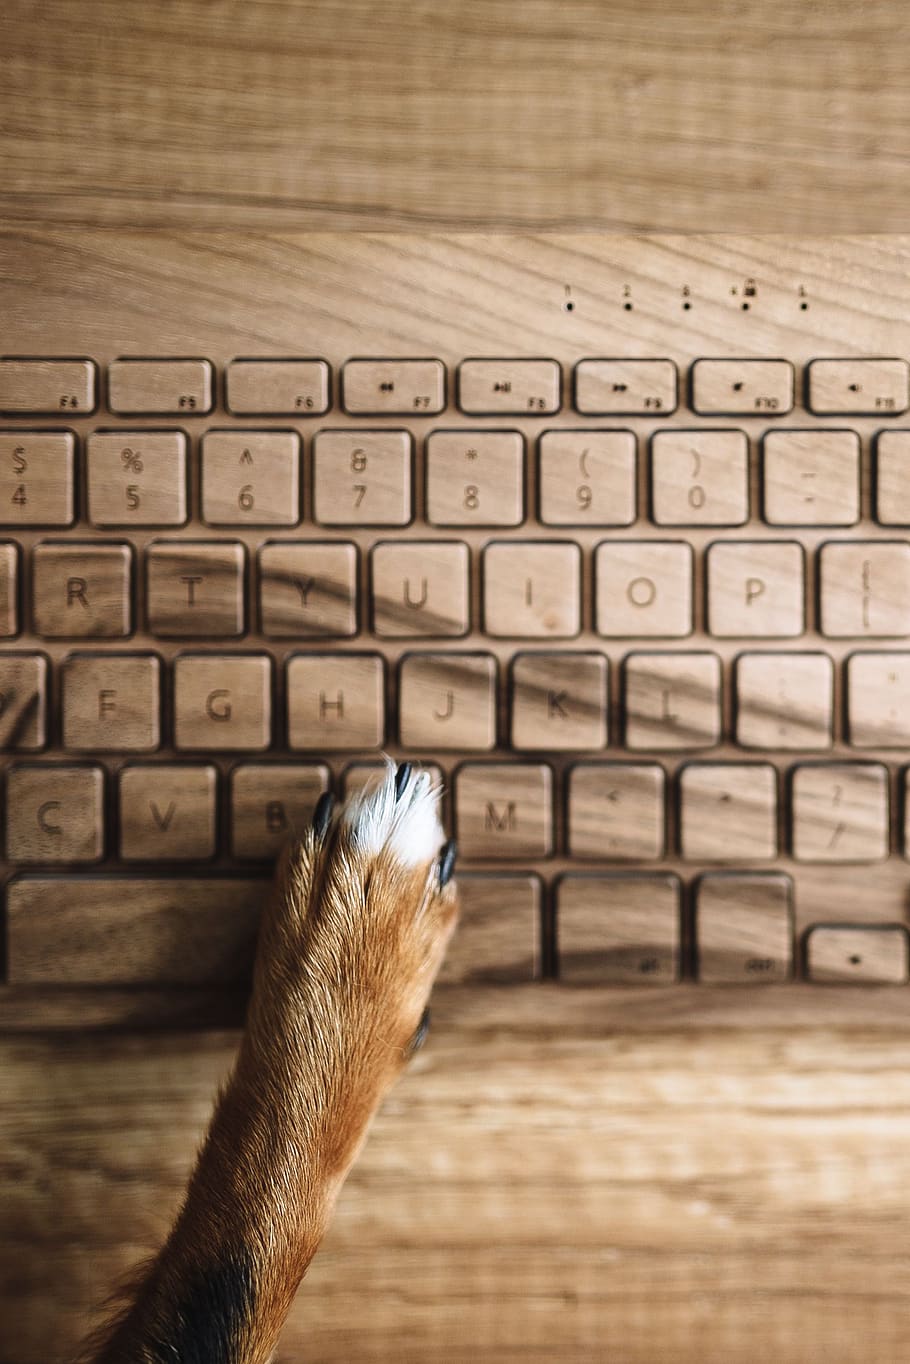 keyboard, technology, dog, pet, animal, wooden keyboard, funny, paw, Dogs, wooden